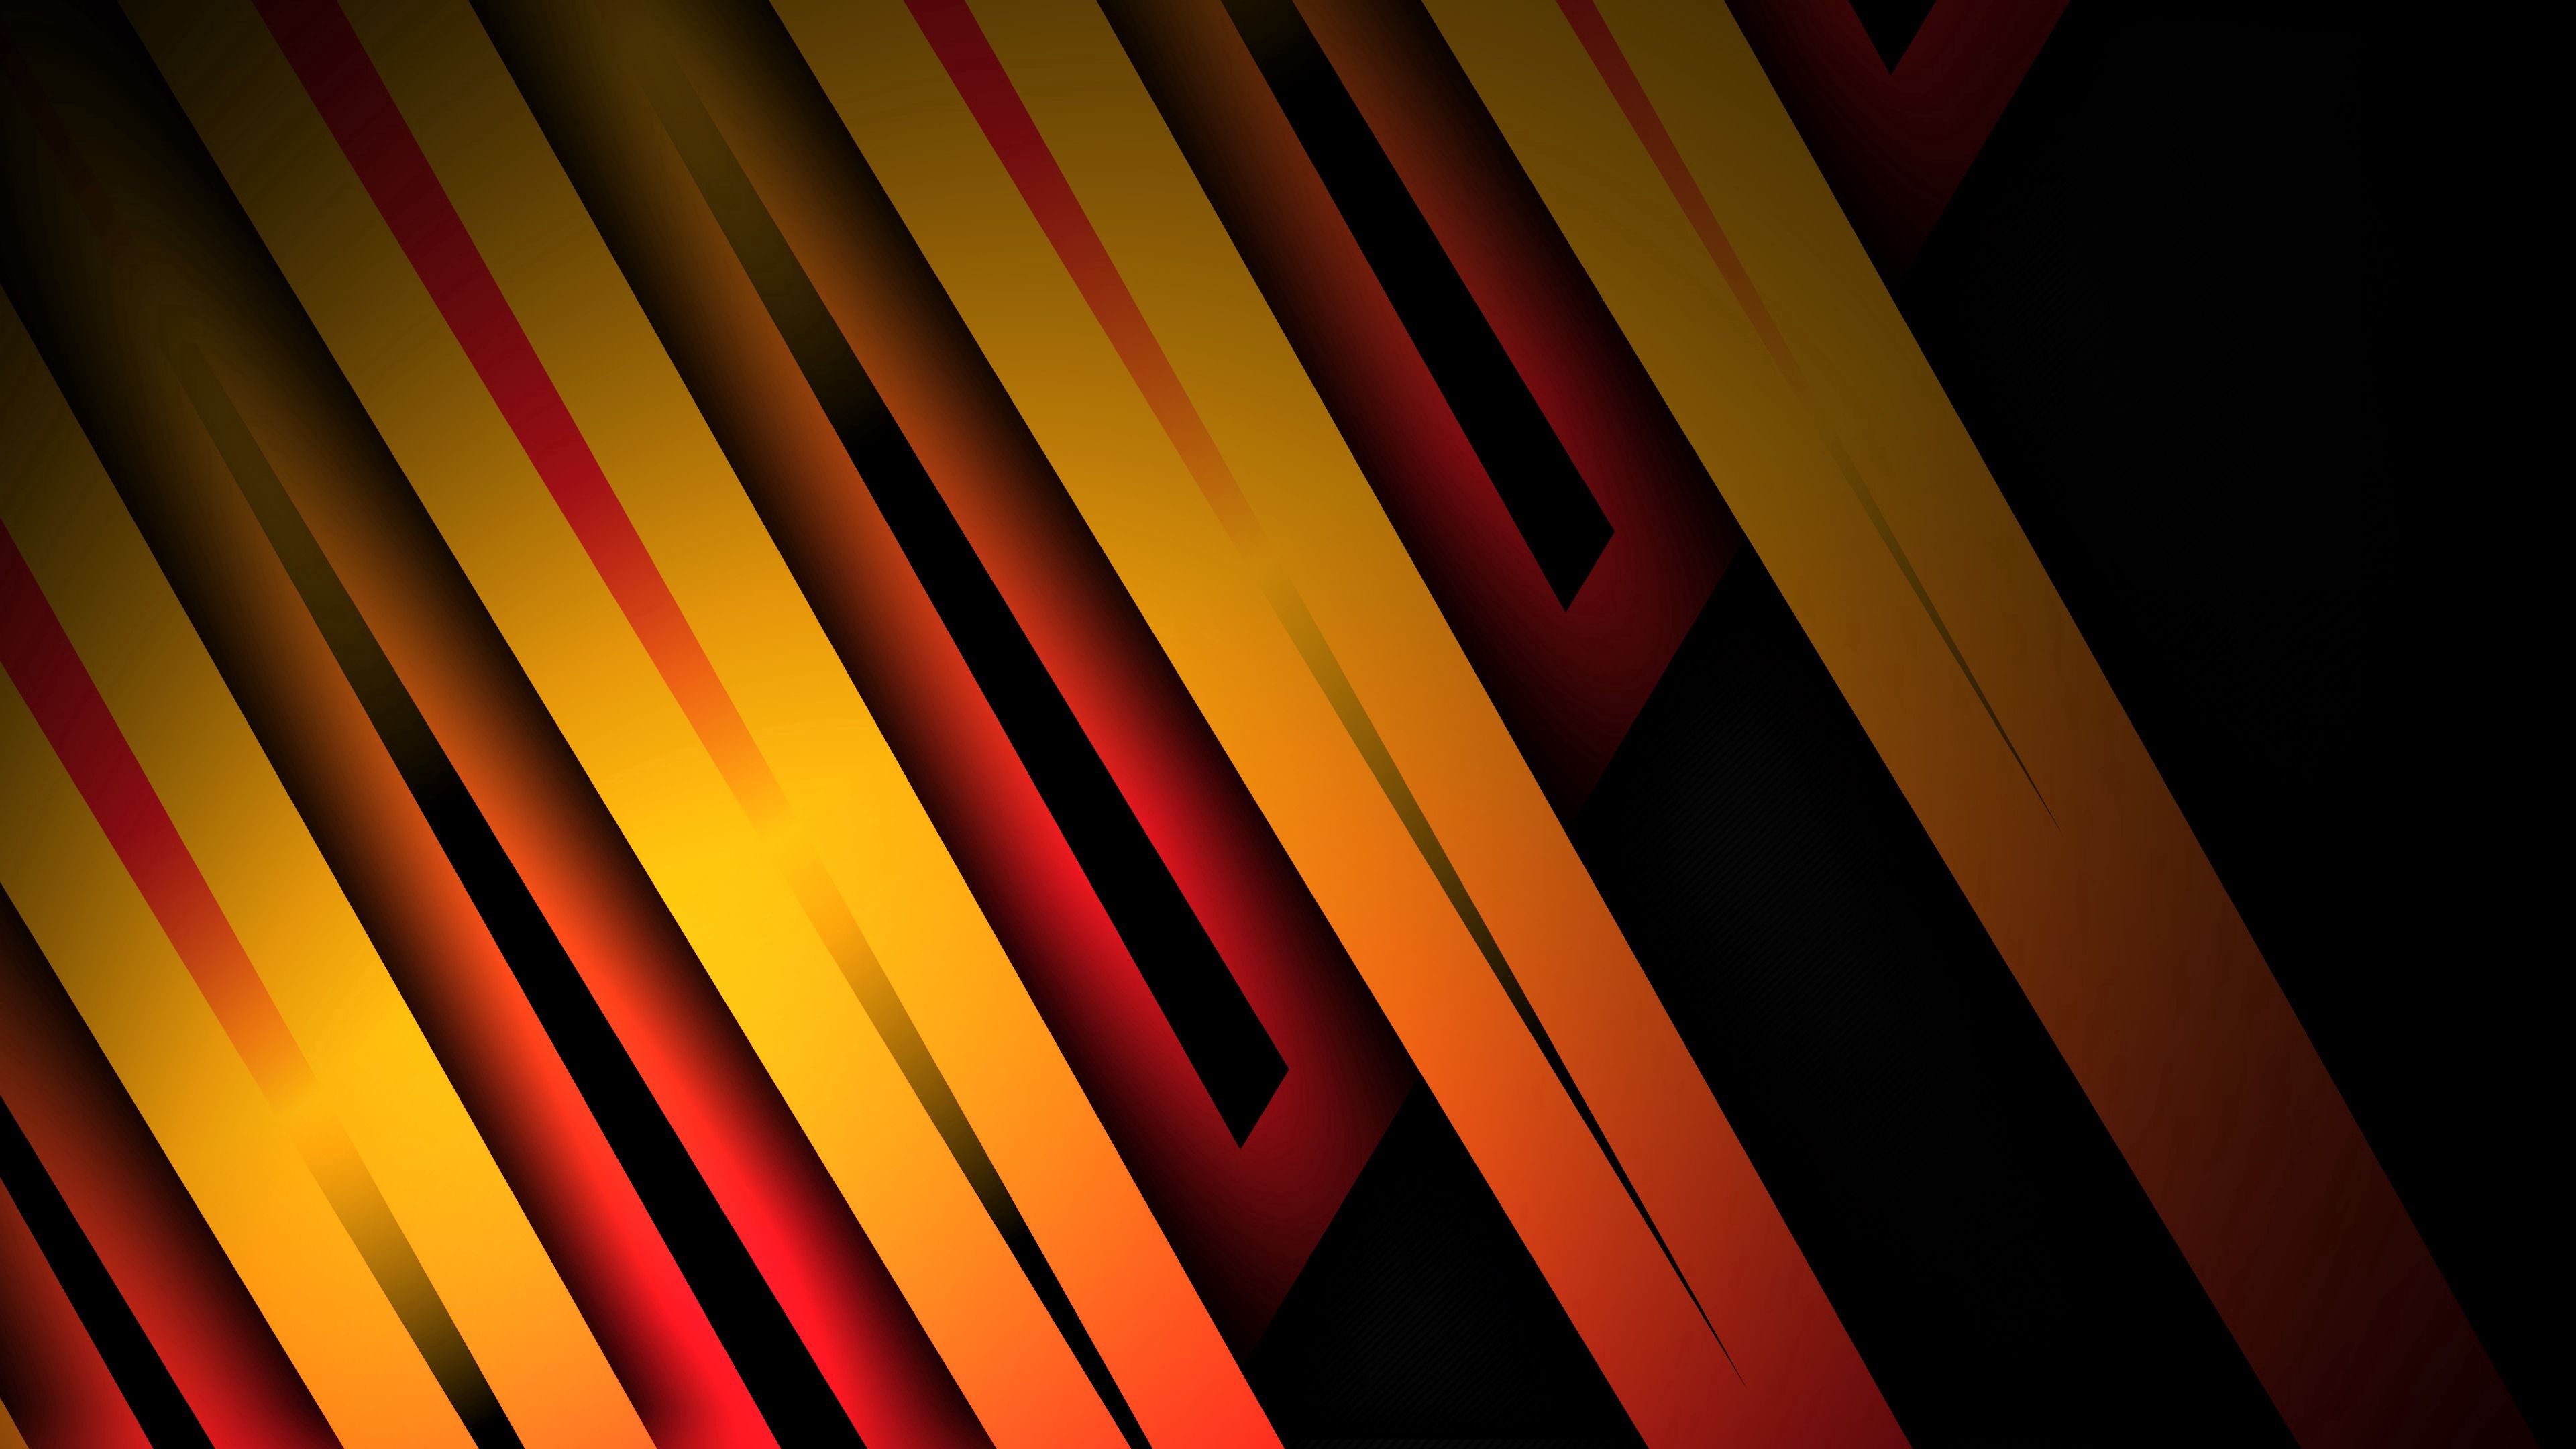 streaks, obliquely, abstract, dark, lines, stripes phone background